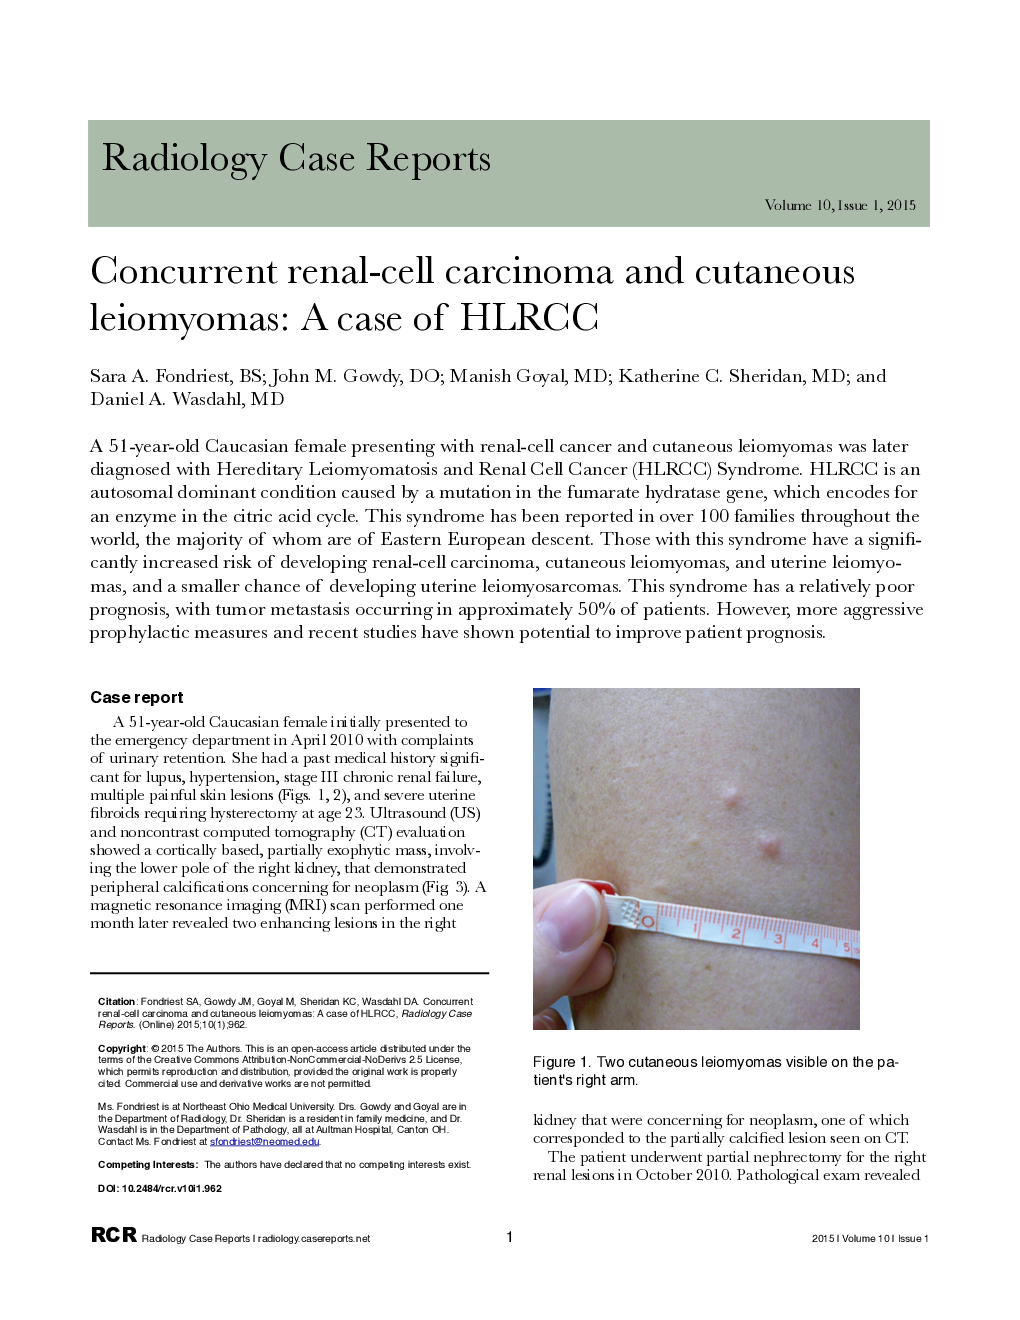 Concurrent renal-cell carcinoma and cutaneous leiomyomas: A case of HLRCC